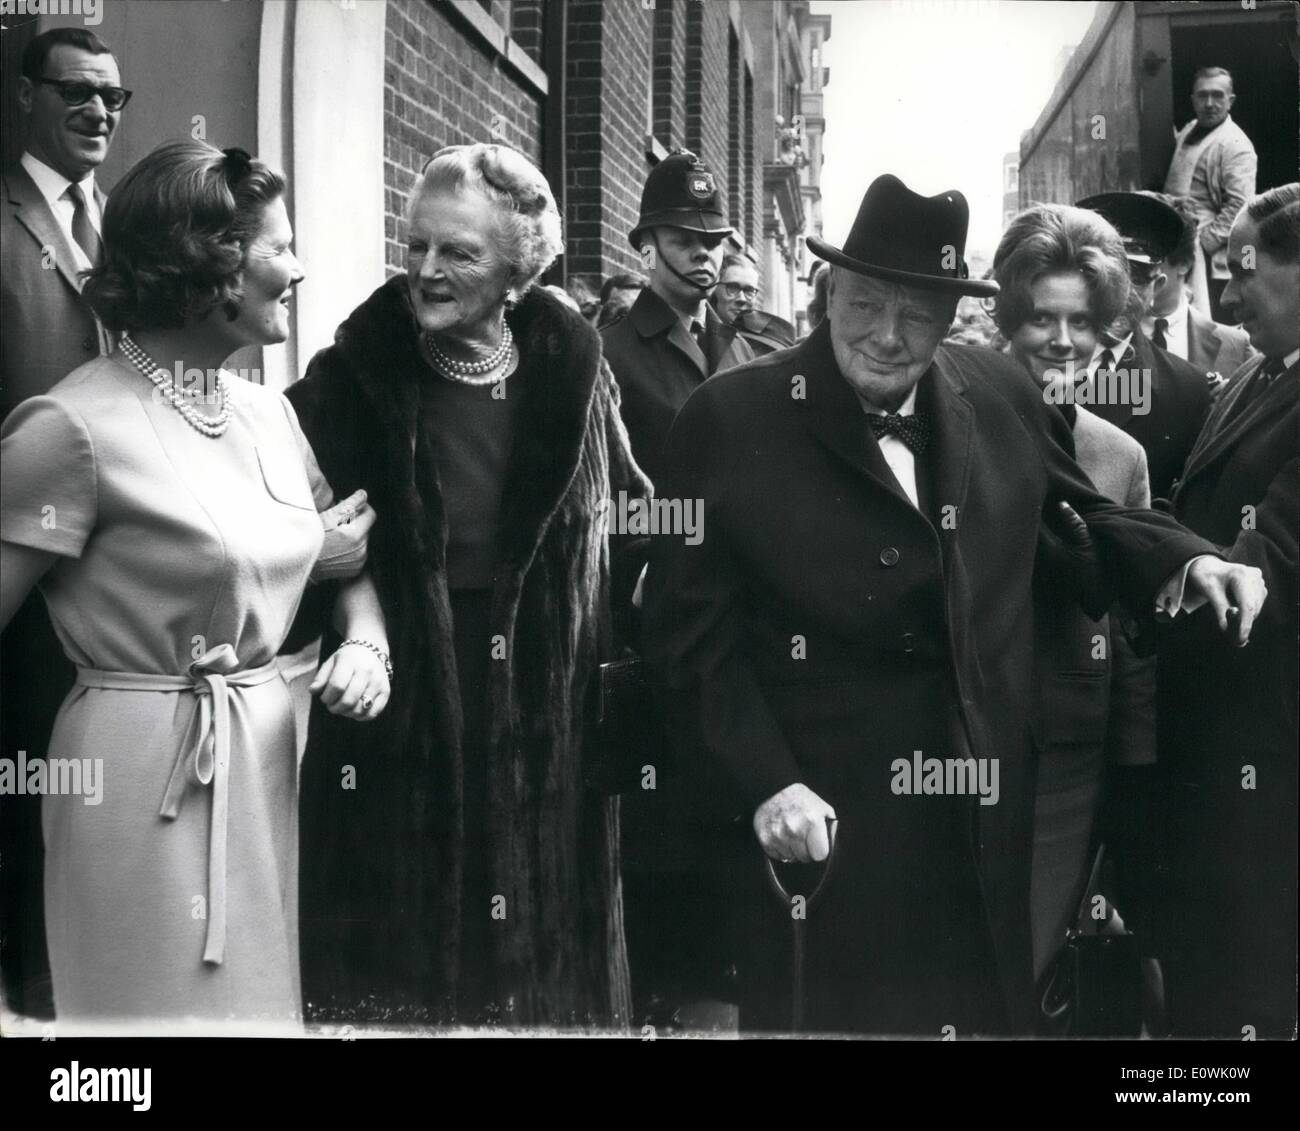 Apr. 04, 1963 - Lady Churchill's 78th birthday - family Luncheon.: Lady Churchill was 78 yesterday, and in celebration of the occasion a small family luncheon was held at the Westminster flat of her daughter Mary, Mrs. Christopher Soames. Photo shows a family group in the street outside the flat, (left to right) daughter Mary Soames, Lady Churchill, sir Winston Churchill, and daughter Edwina, (Mrs. Piers Dixon) Stock Photo